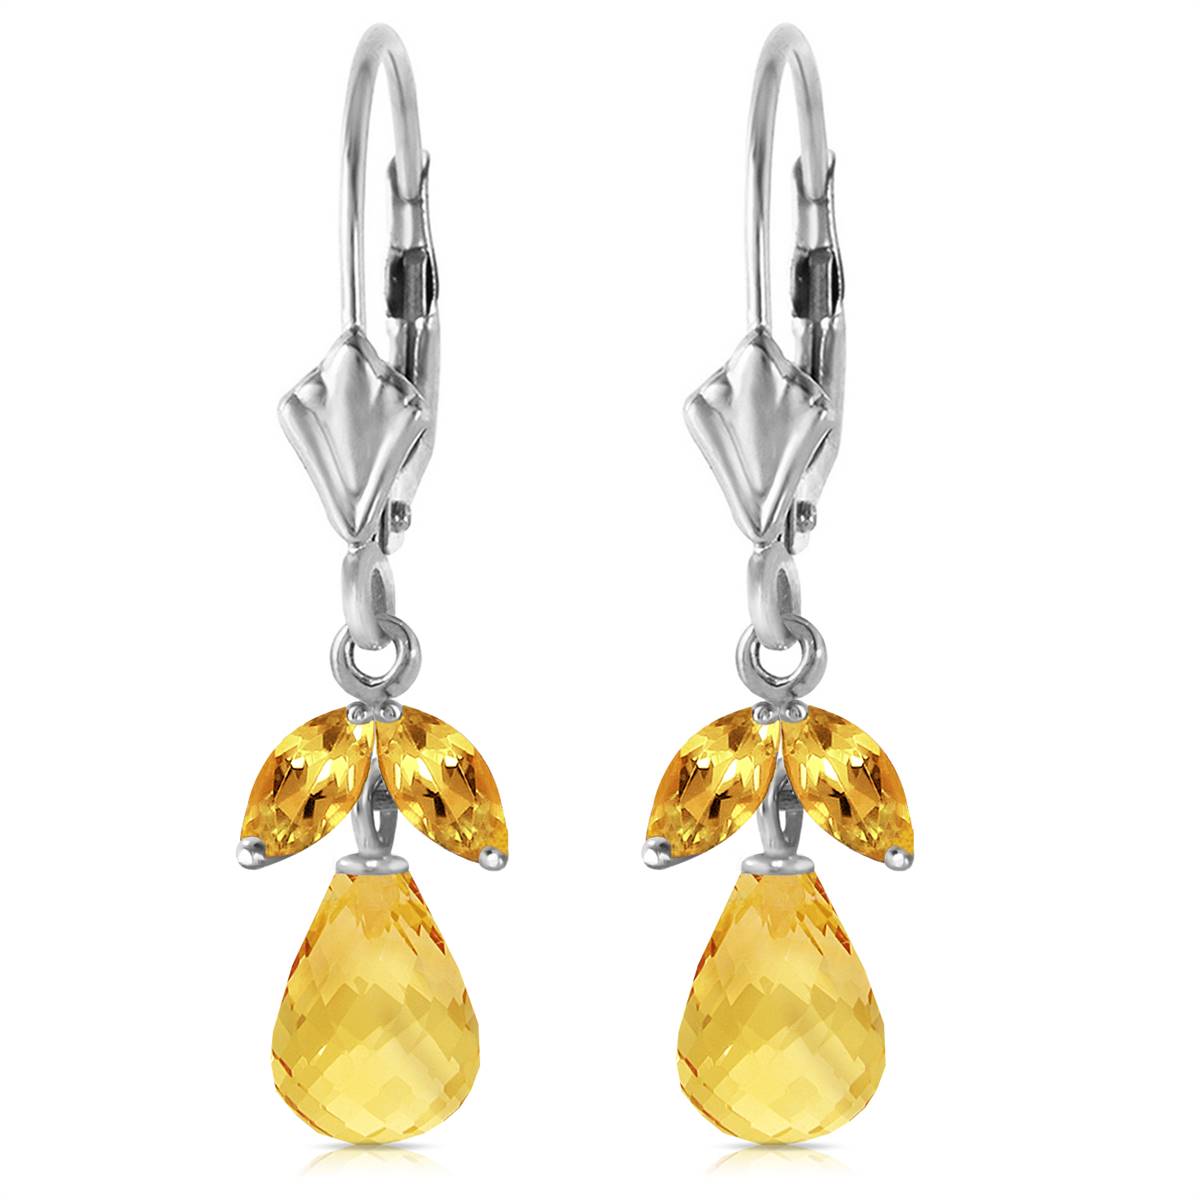 3.4 Carat 14K Solid White Gold Not Crooked Path Citrine Earrings